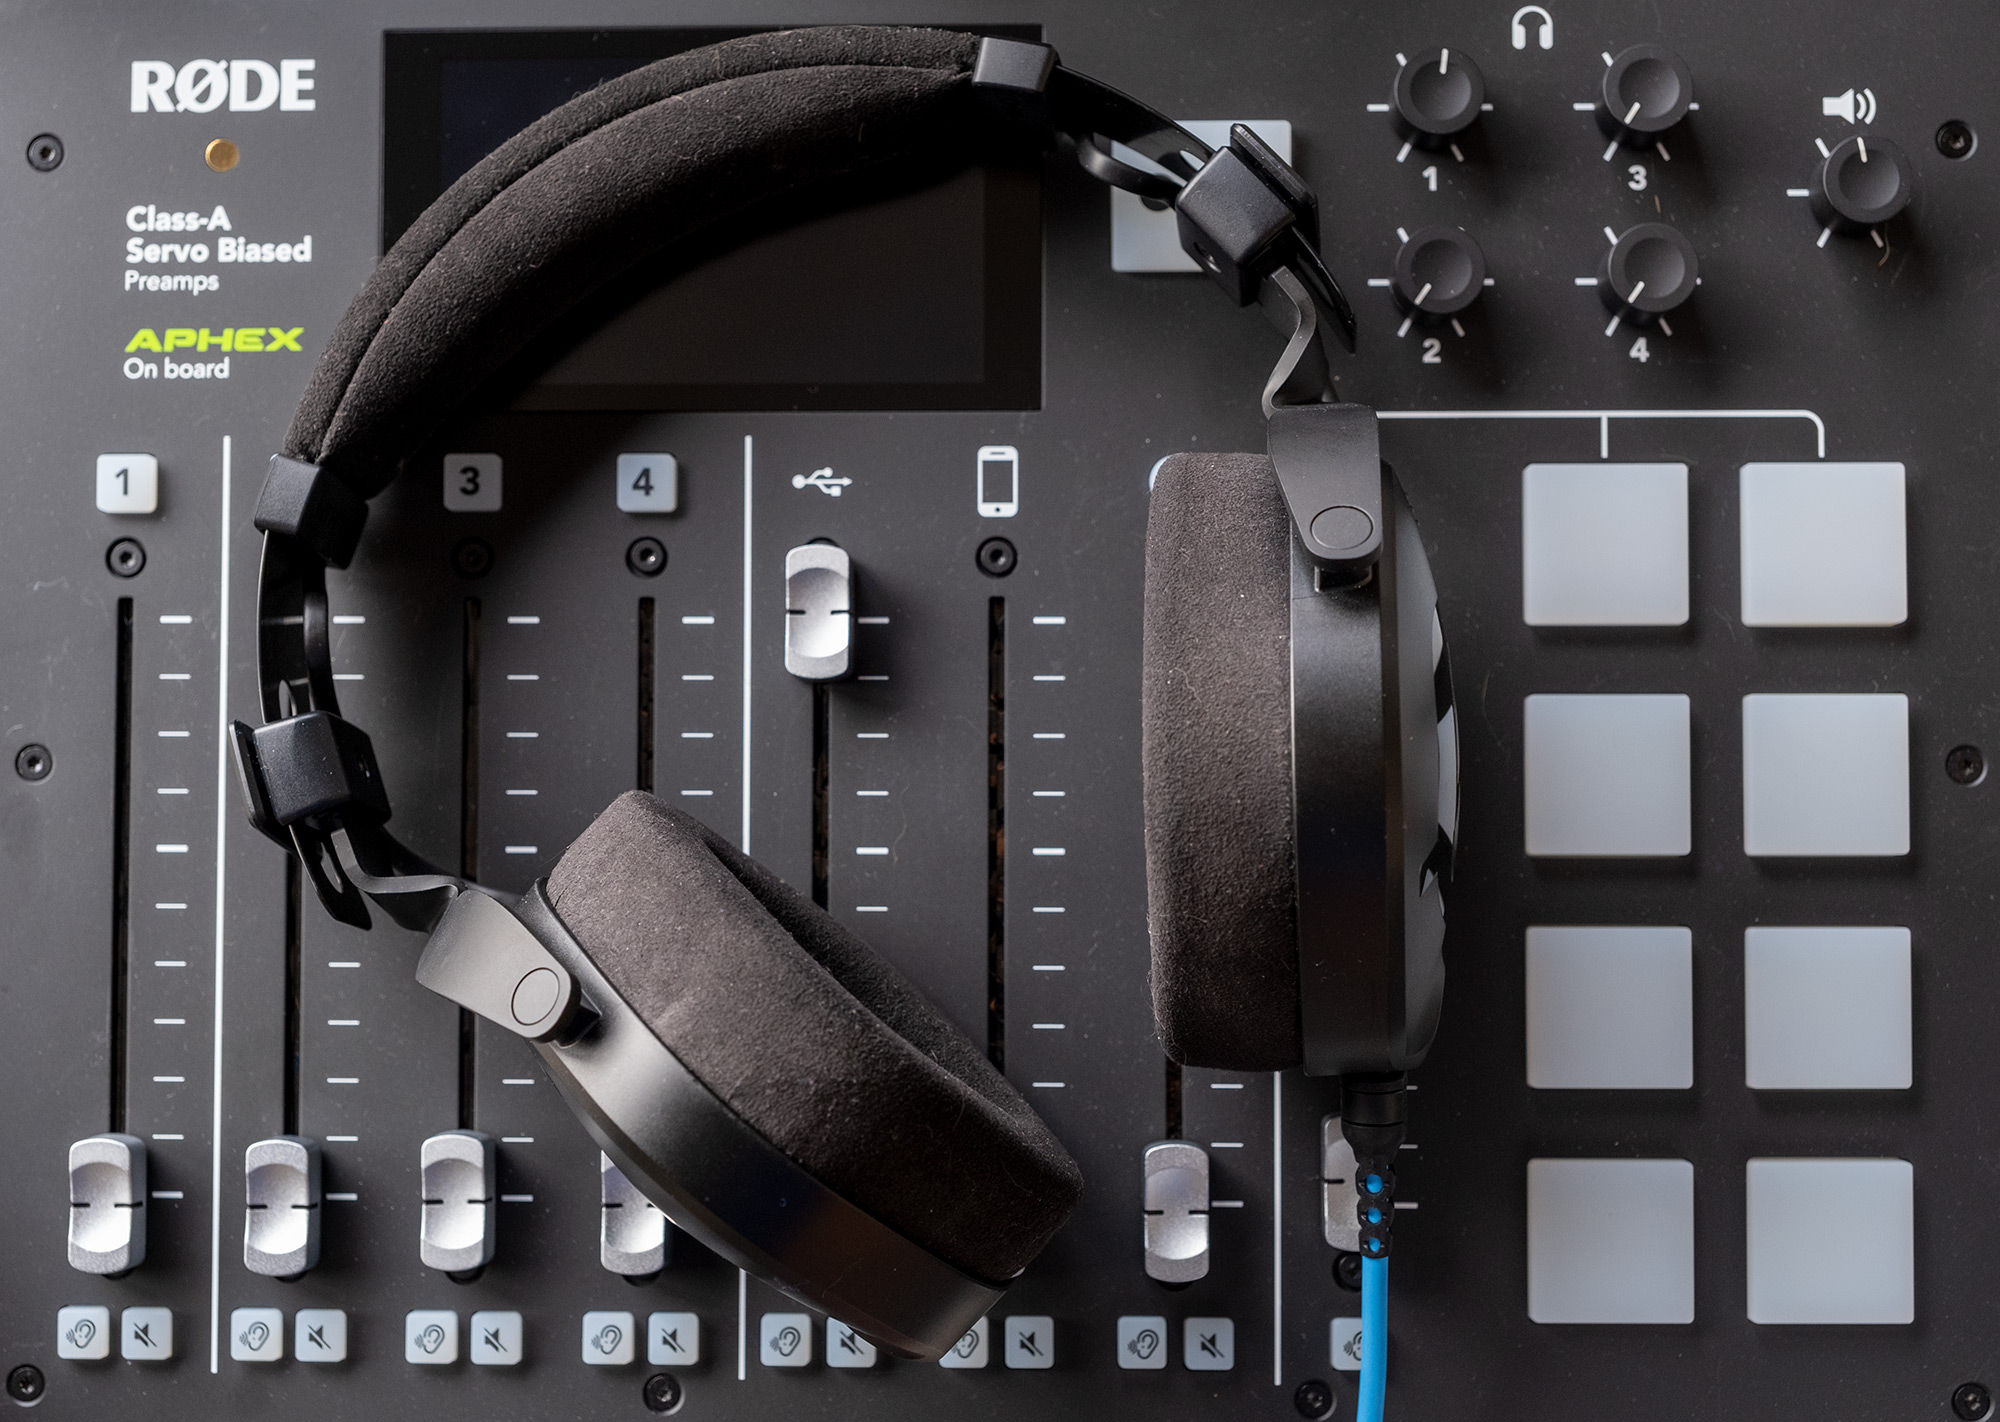 Rode’s first headphones are the creator-focused NTH-100